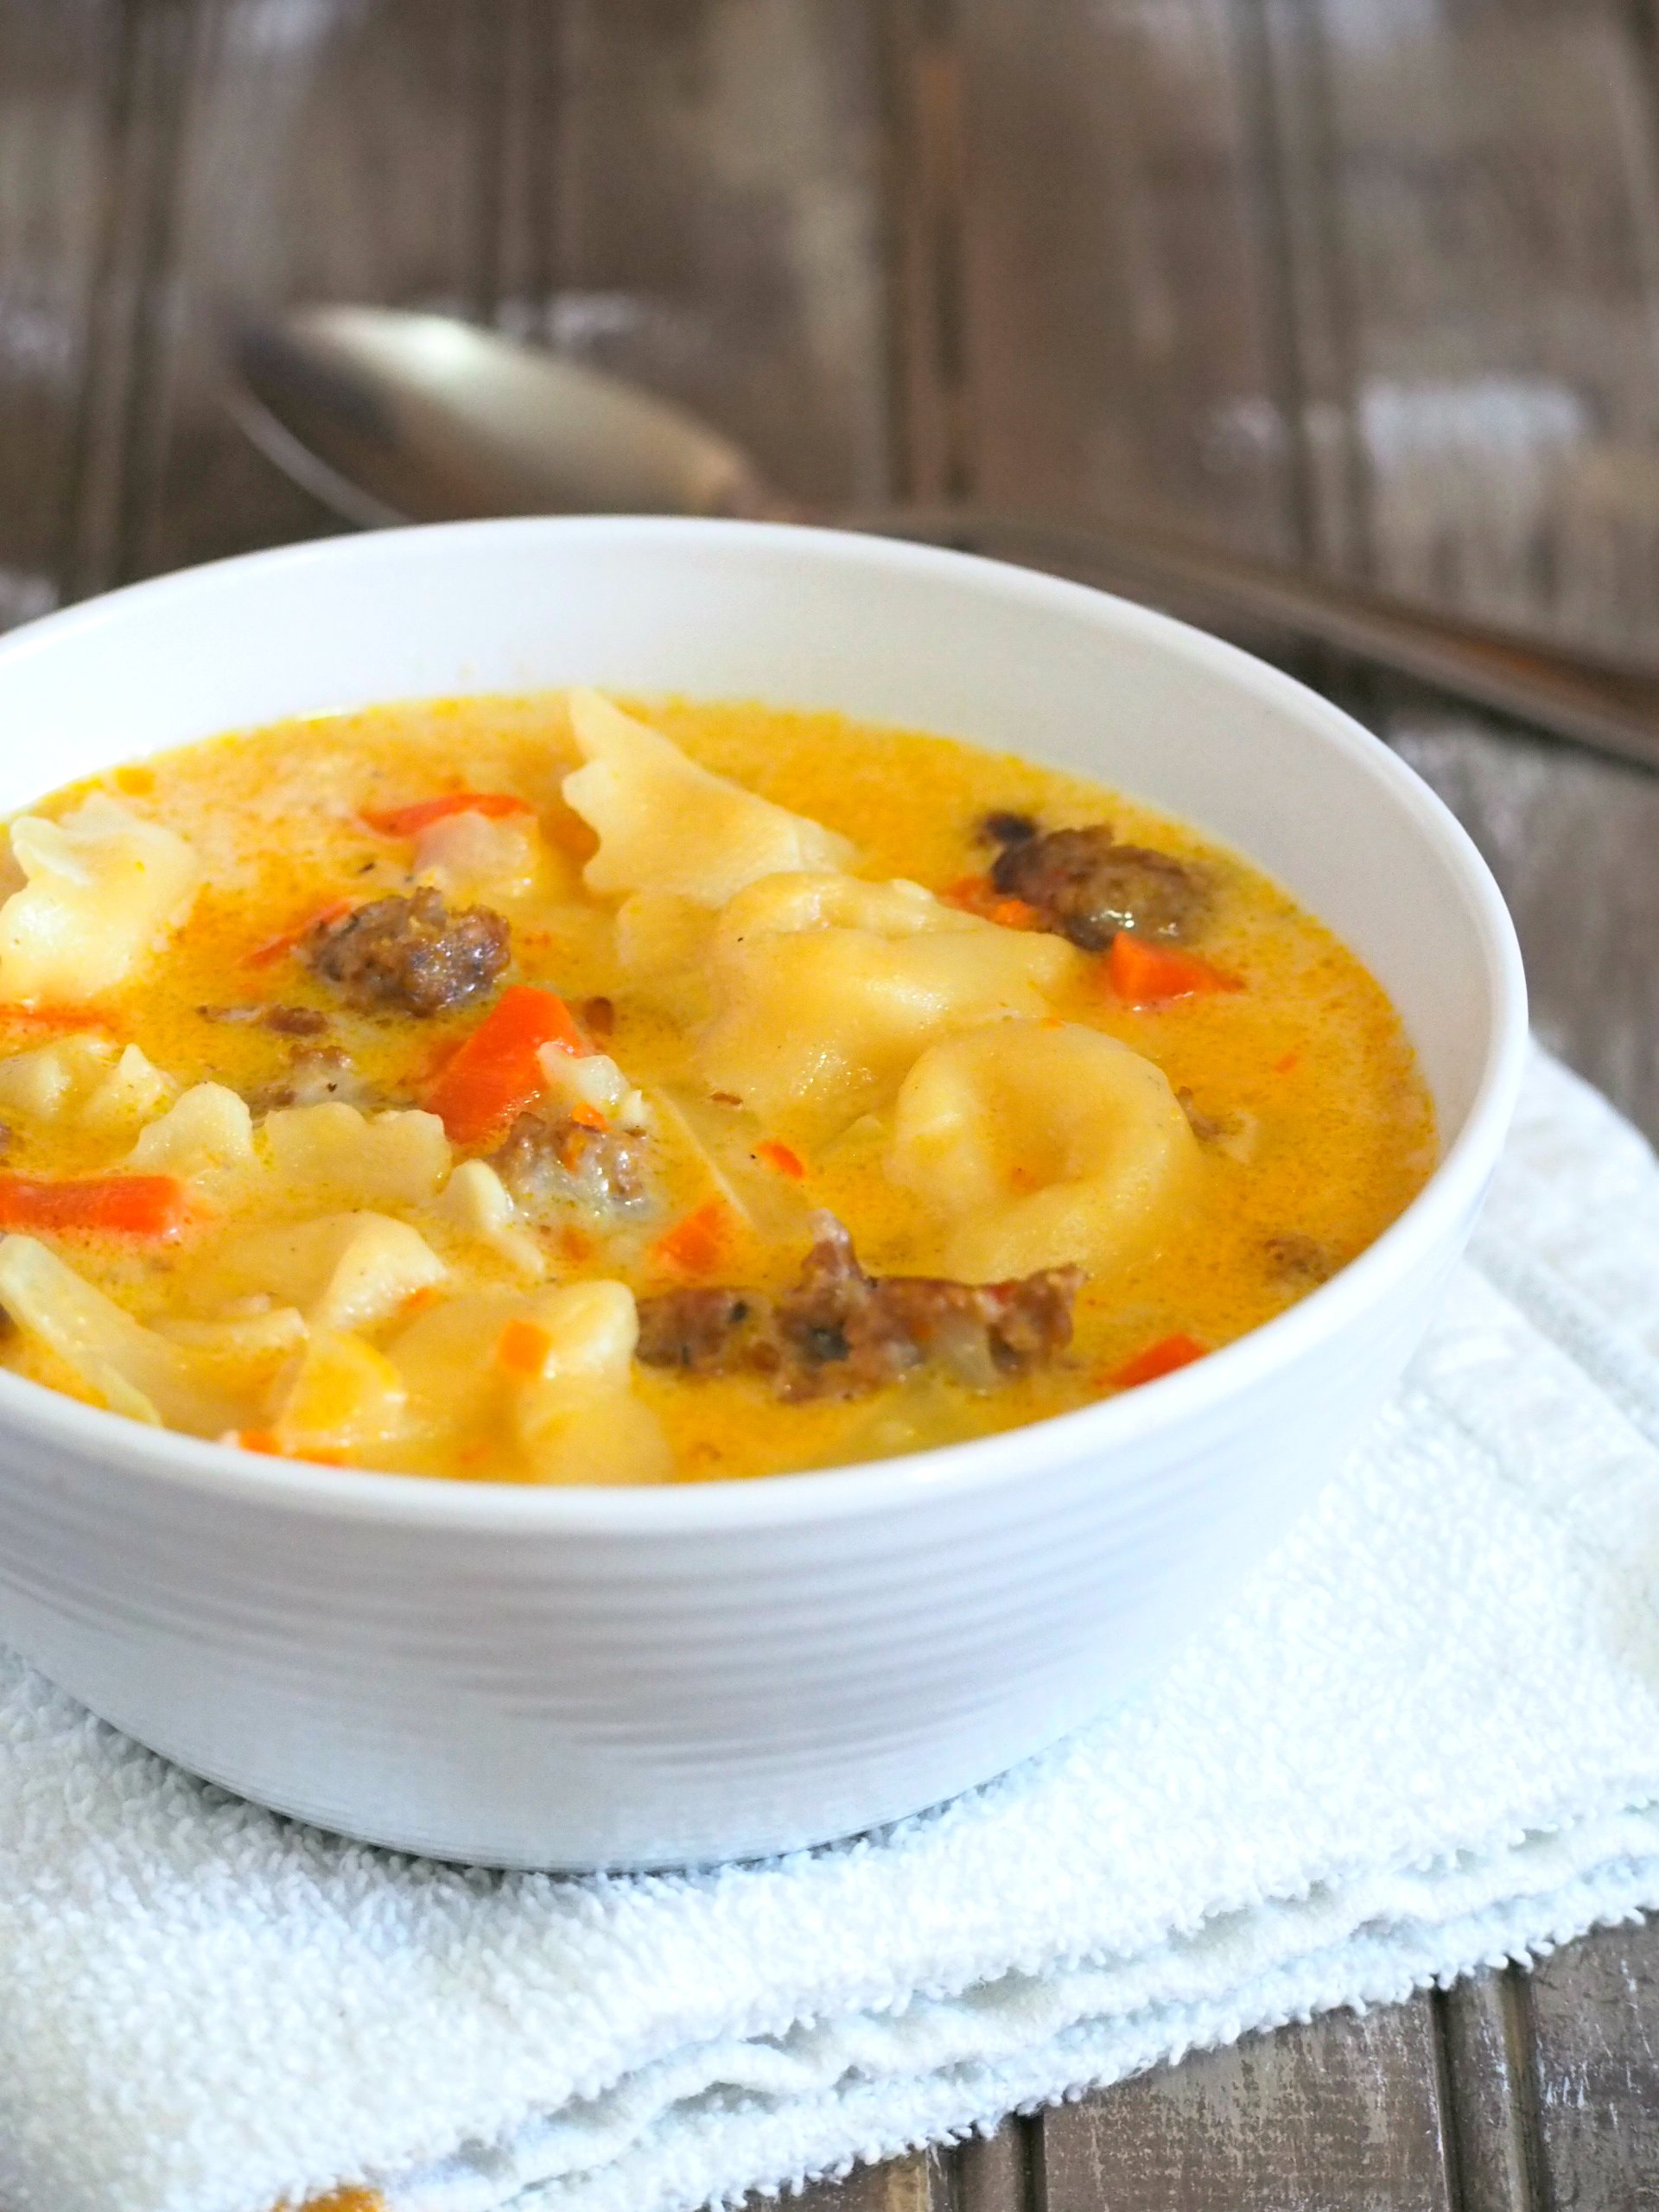 This Sausage Tortellini Soup gives you warmth in a bowl. The creamy and tasty broth, the crunchy vegetables and the flavorful Italian sausage make this soup the perfect comfort food on a cold day.